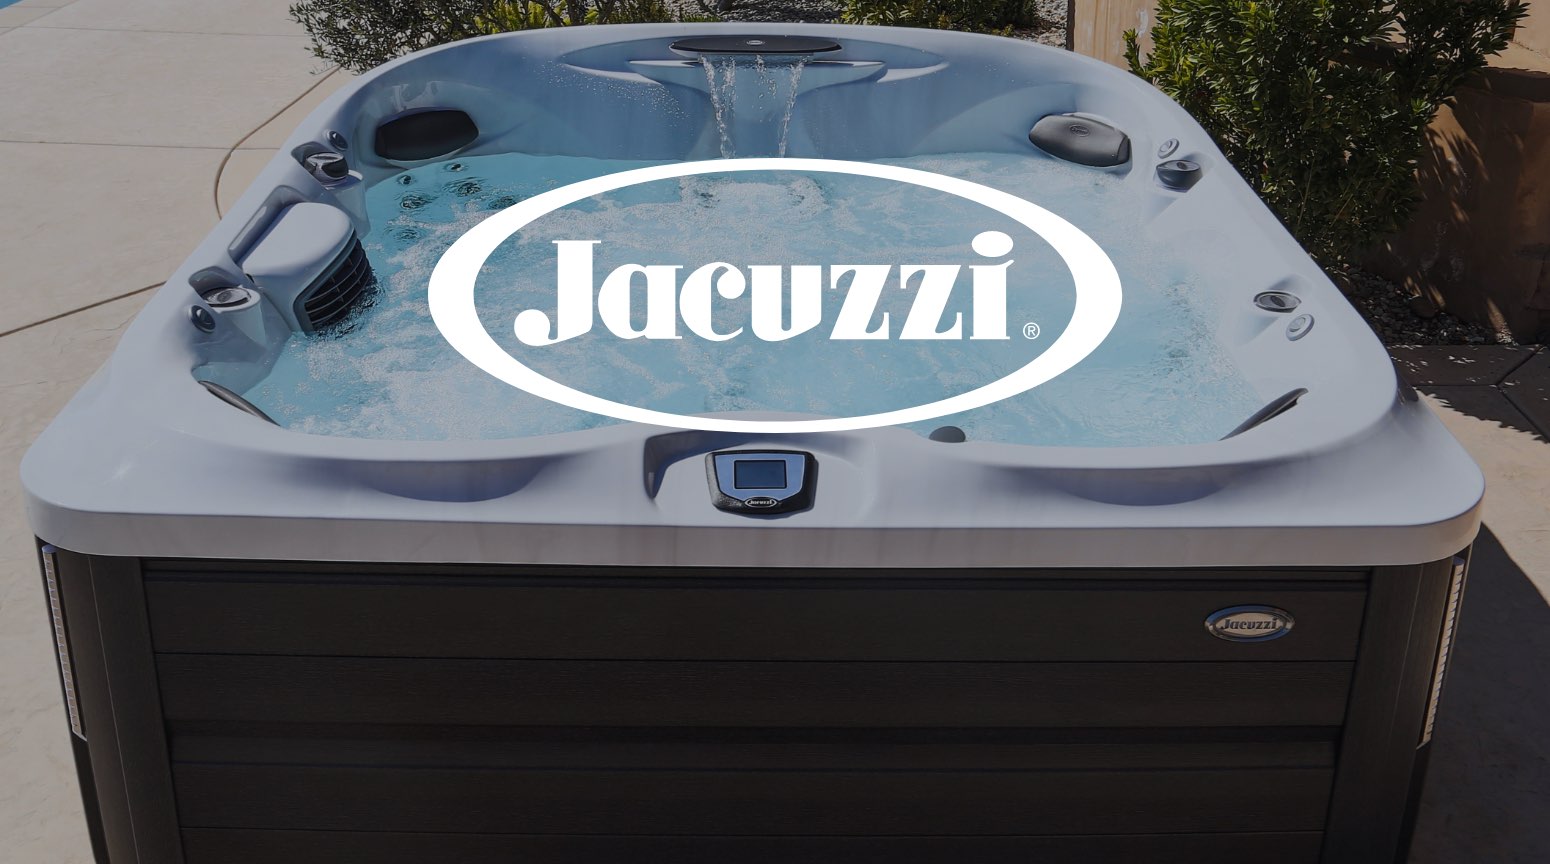 The original and the best... Anything else is just a hot tub!